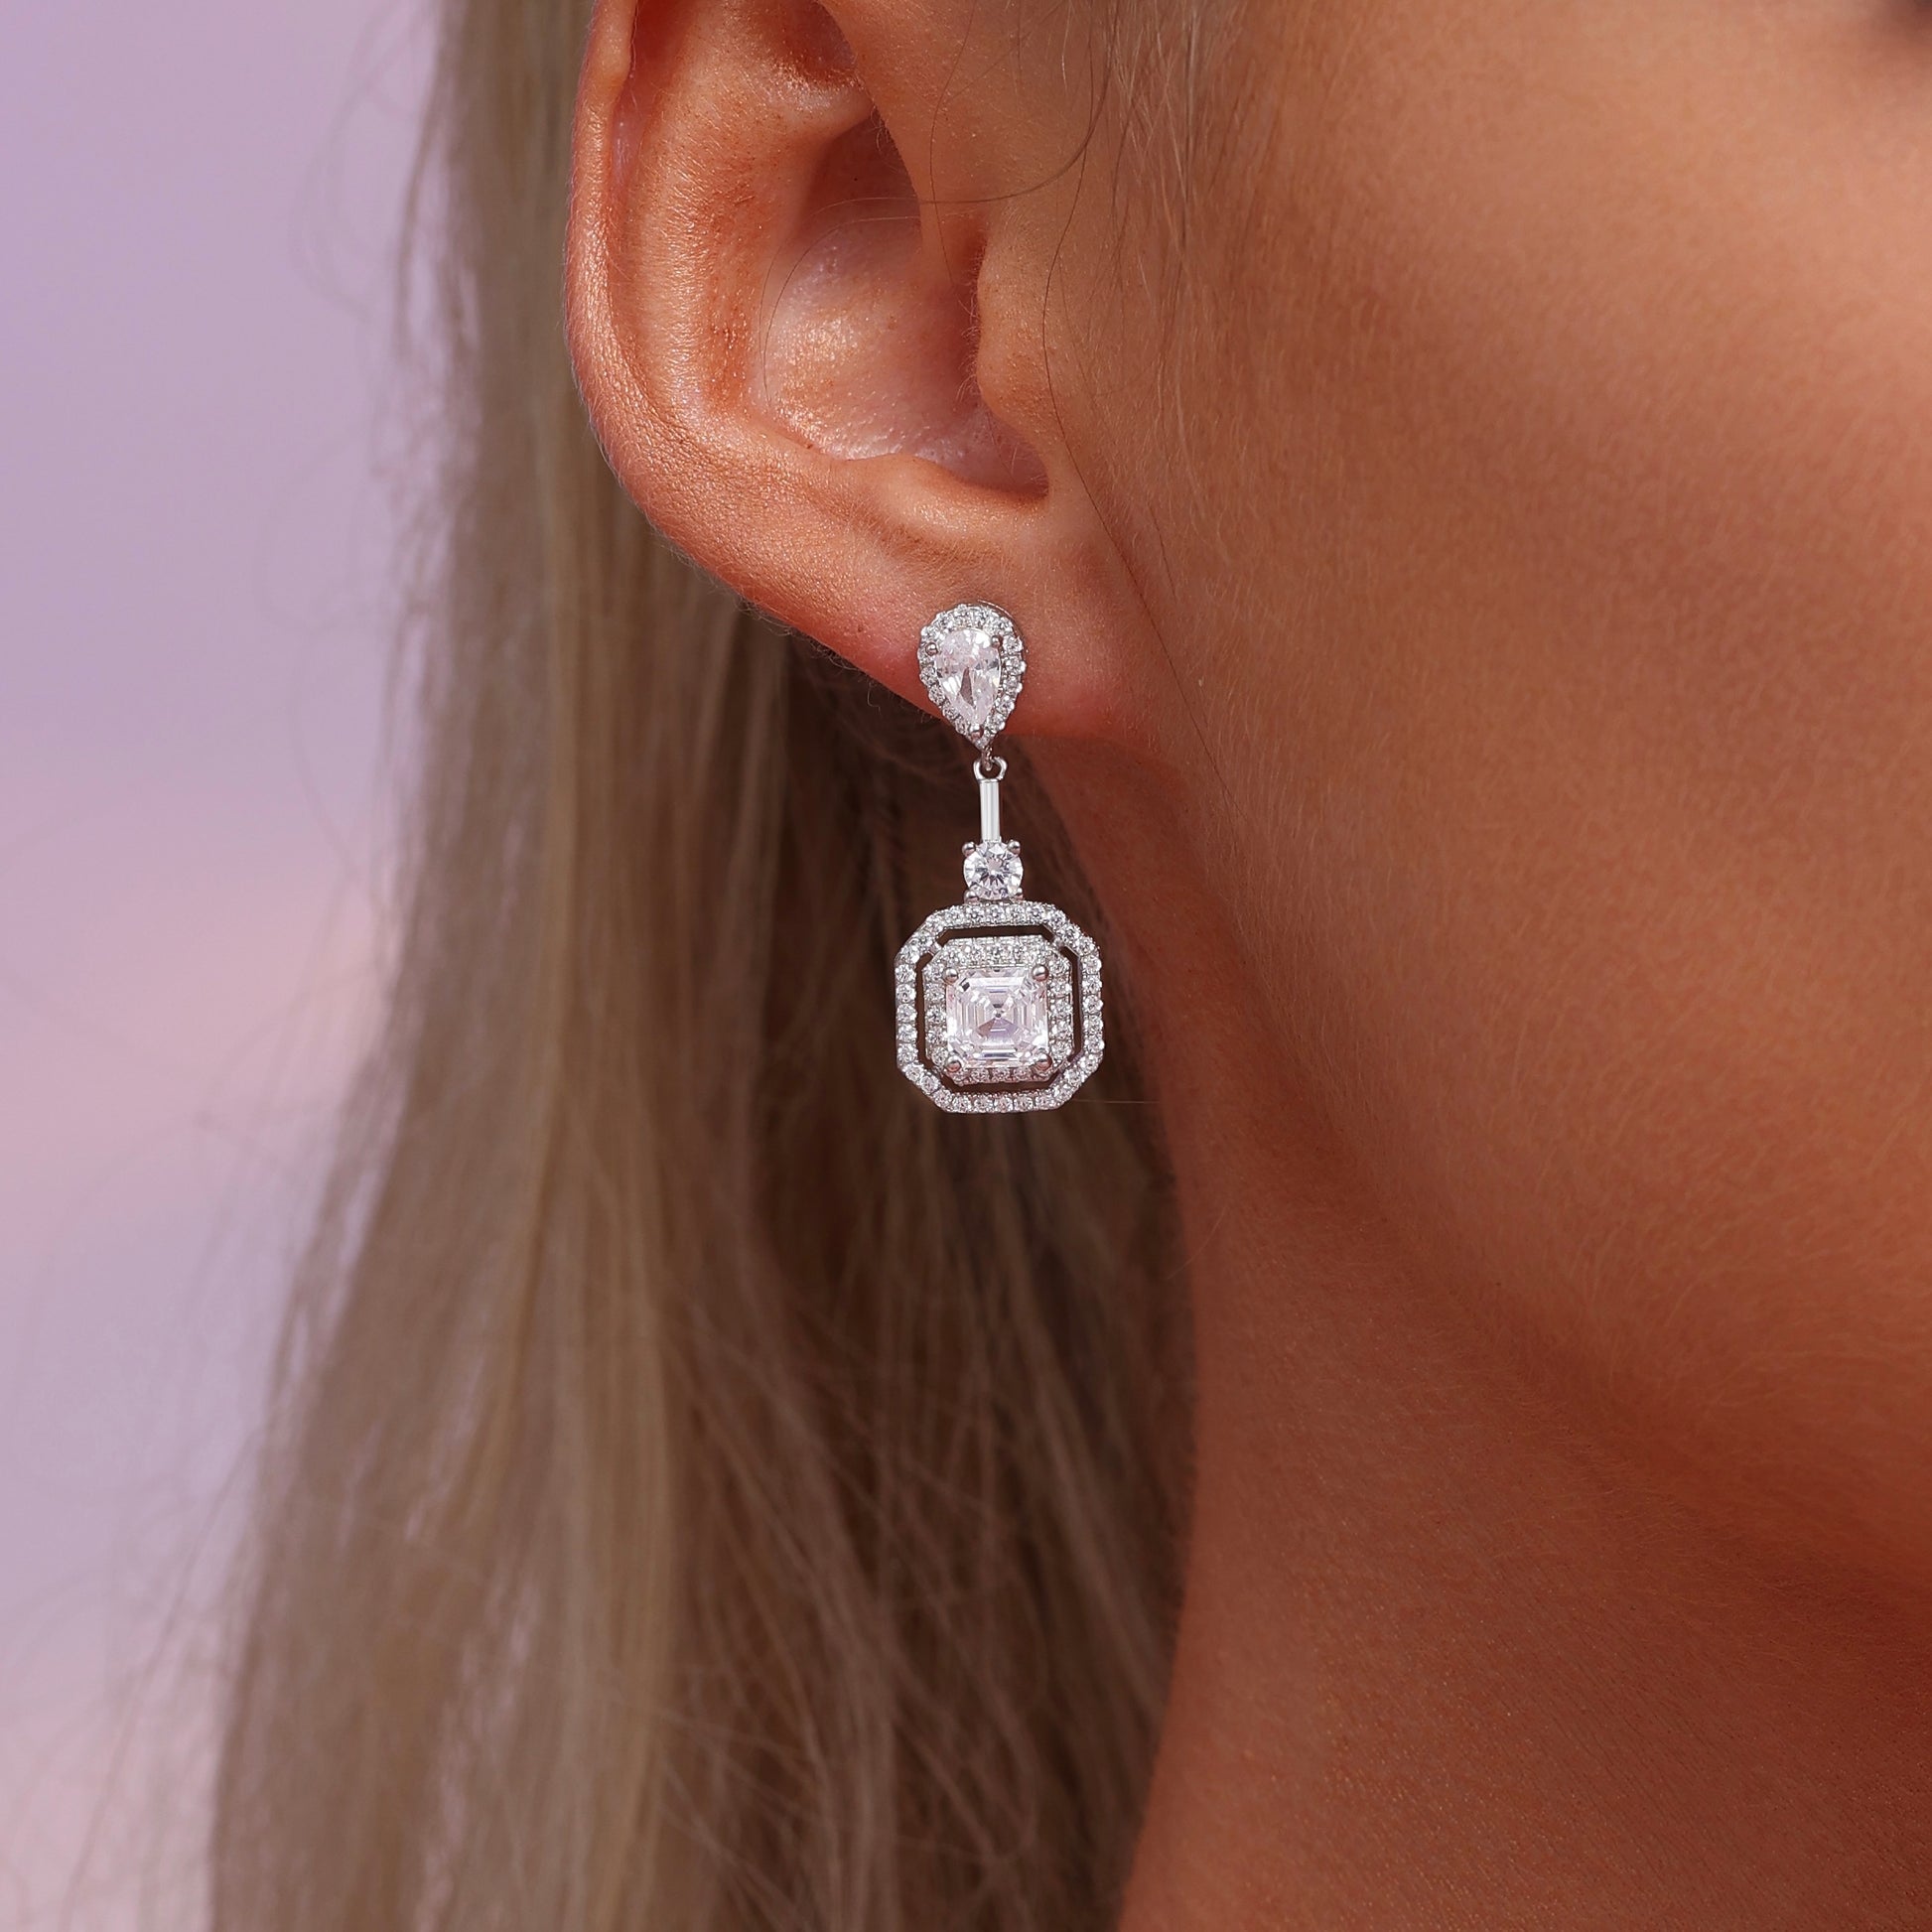 Sterling Silver Rhodium Plated and CZ Stud Halo Earring